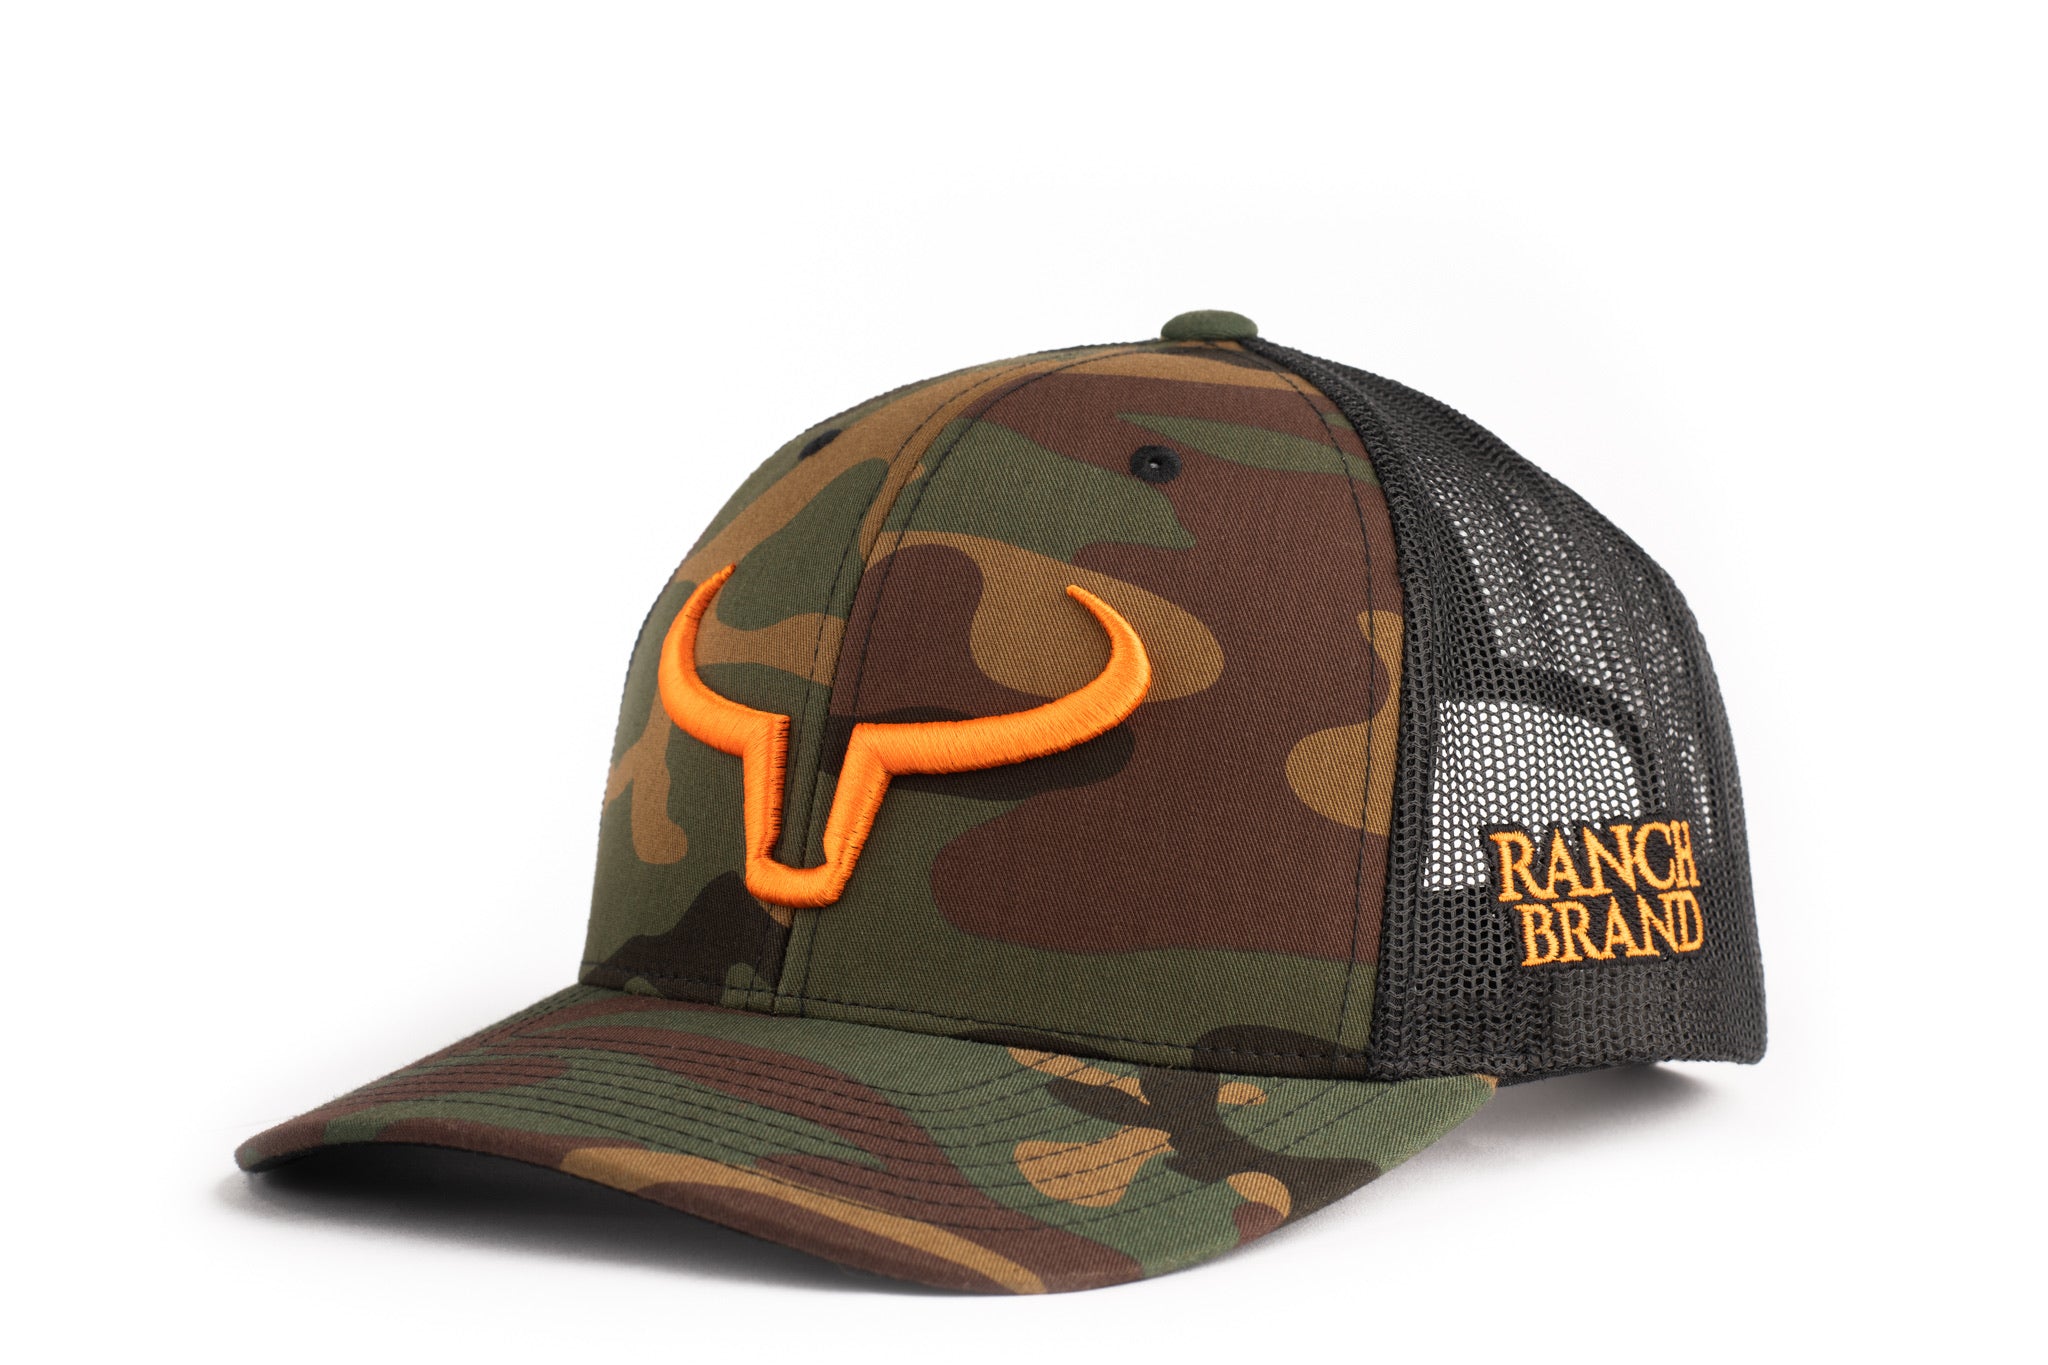 Caps - Ranch Brand Clothing